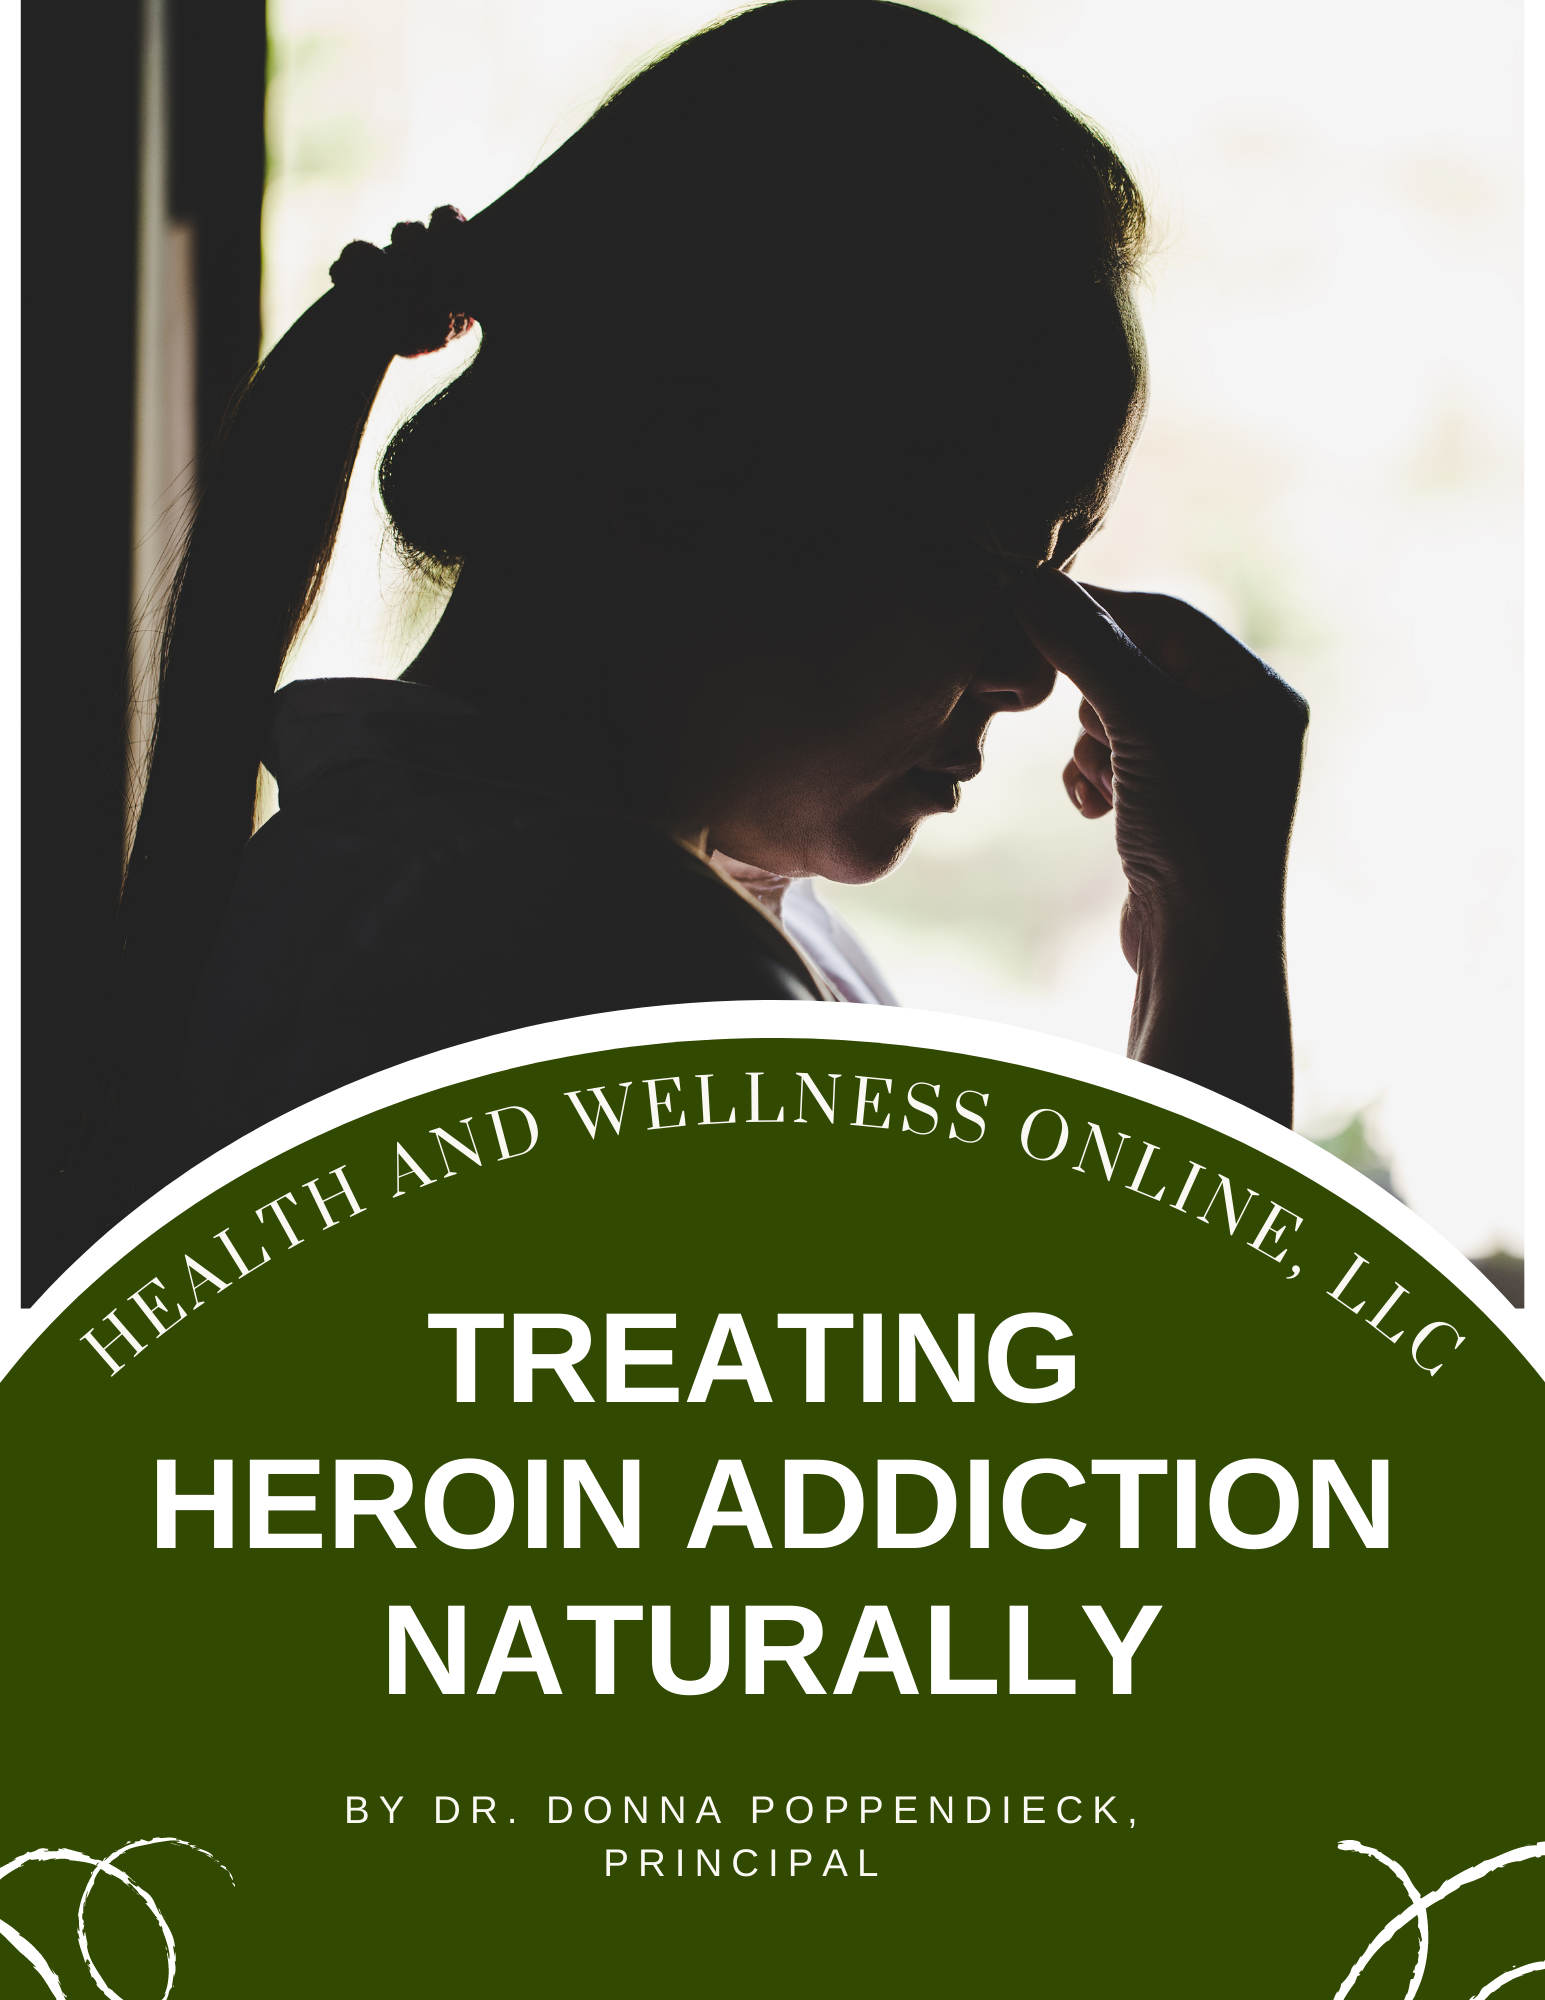 Treating Heroin Addiction Naturally is a course by Health and Wellness Online.